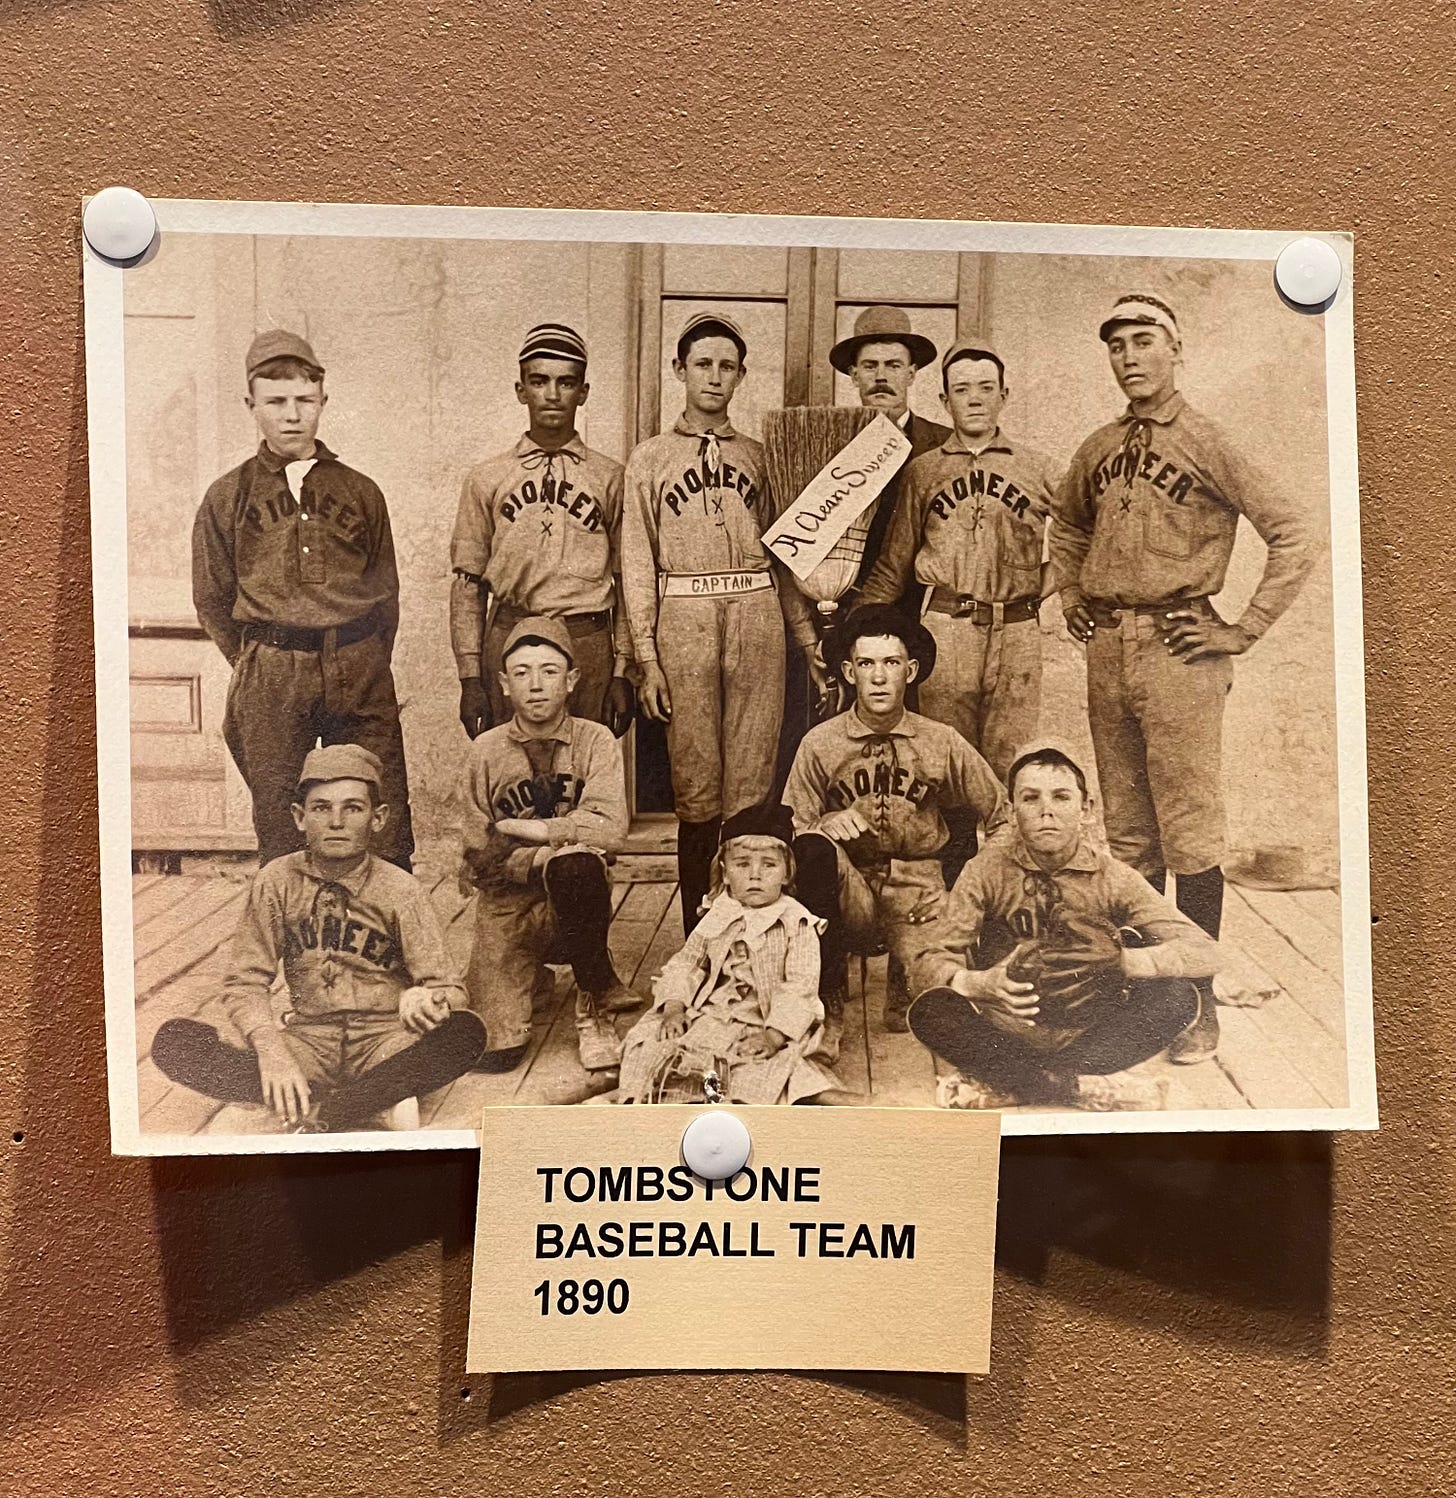 an image of a photograph on a bulletin board of the tombstone pioneers baseball team. it's mostly teenage kids with one toddler in the front, and one is holding a broom that says 'a clean sweep' on it.